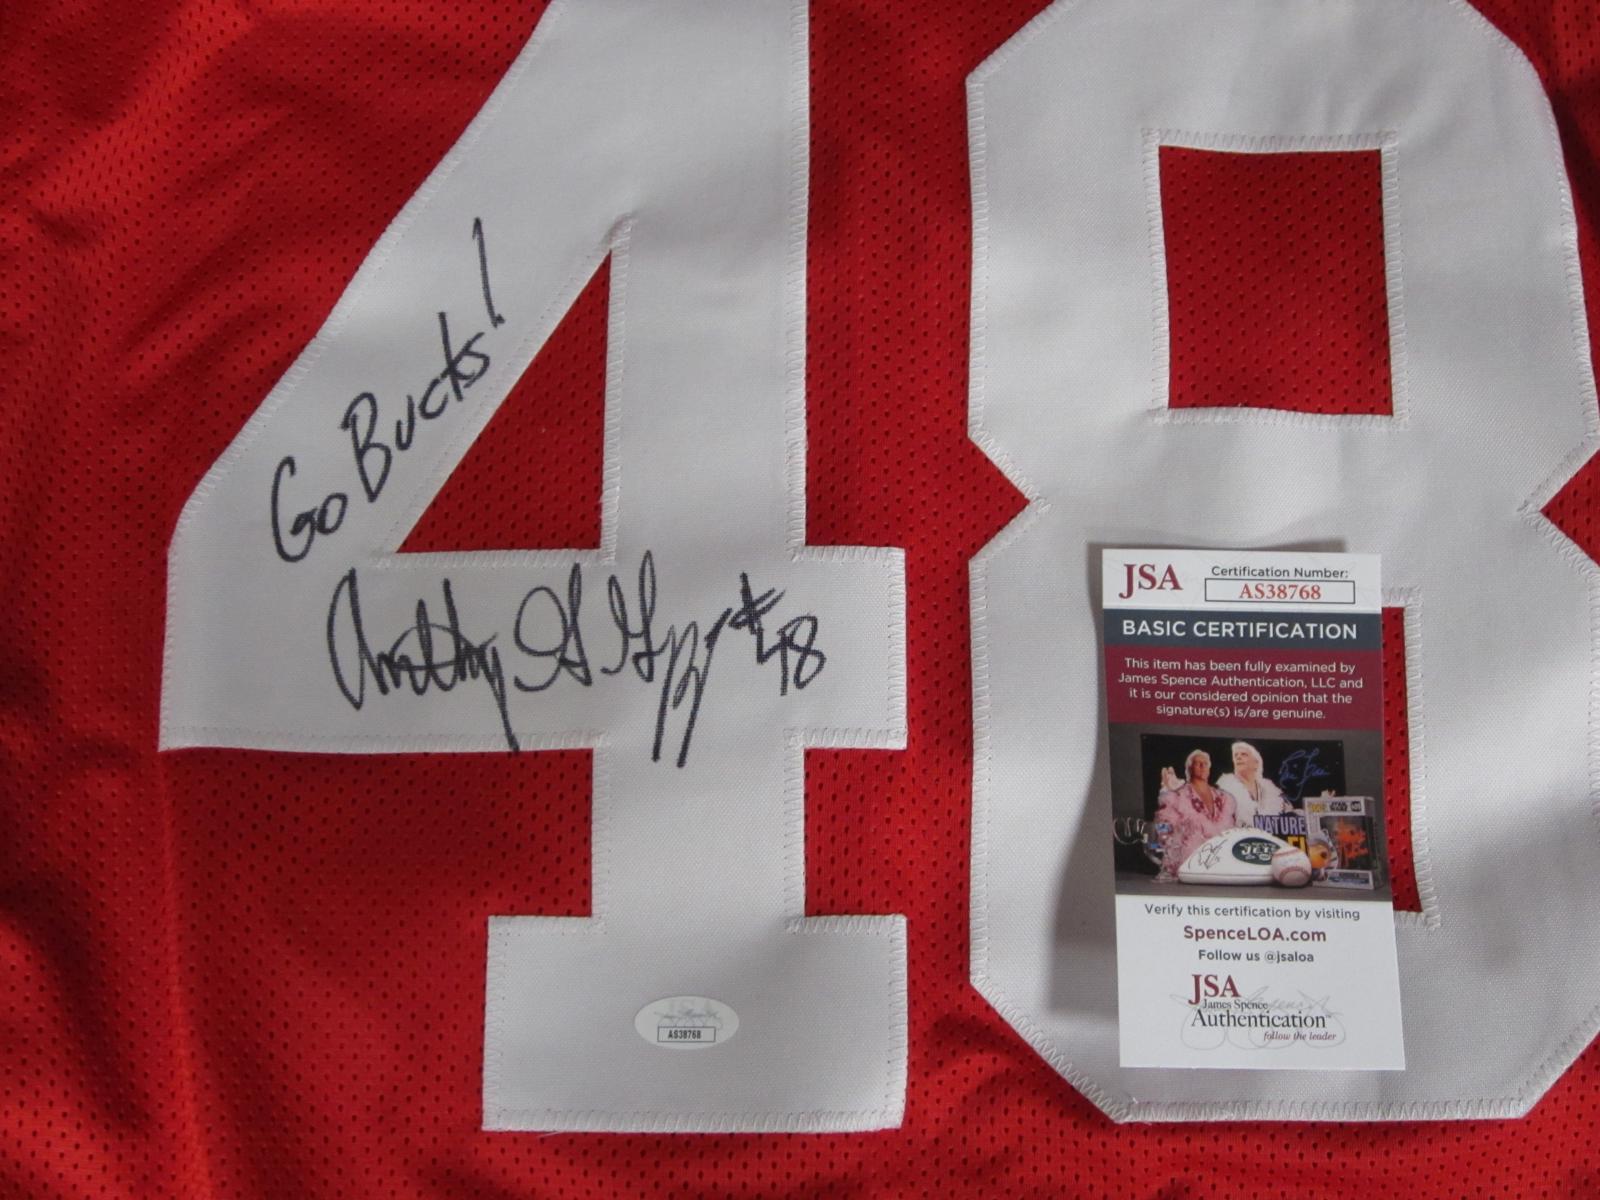 OHIO STATE ANTHONY GRIGGS SIGNED JERSEY JSA